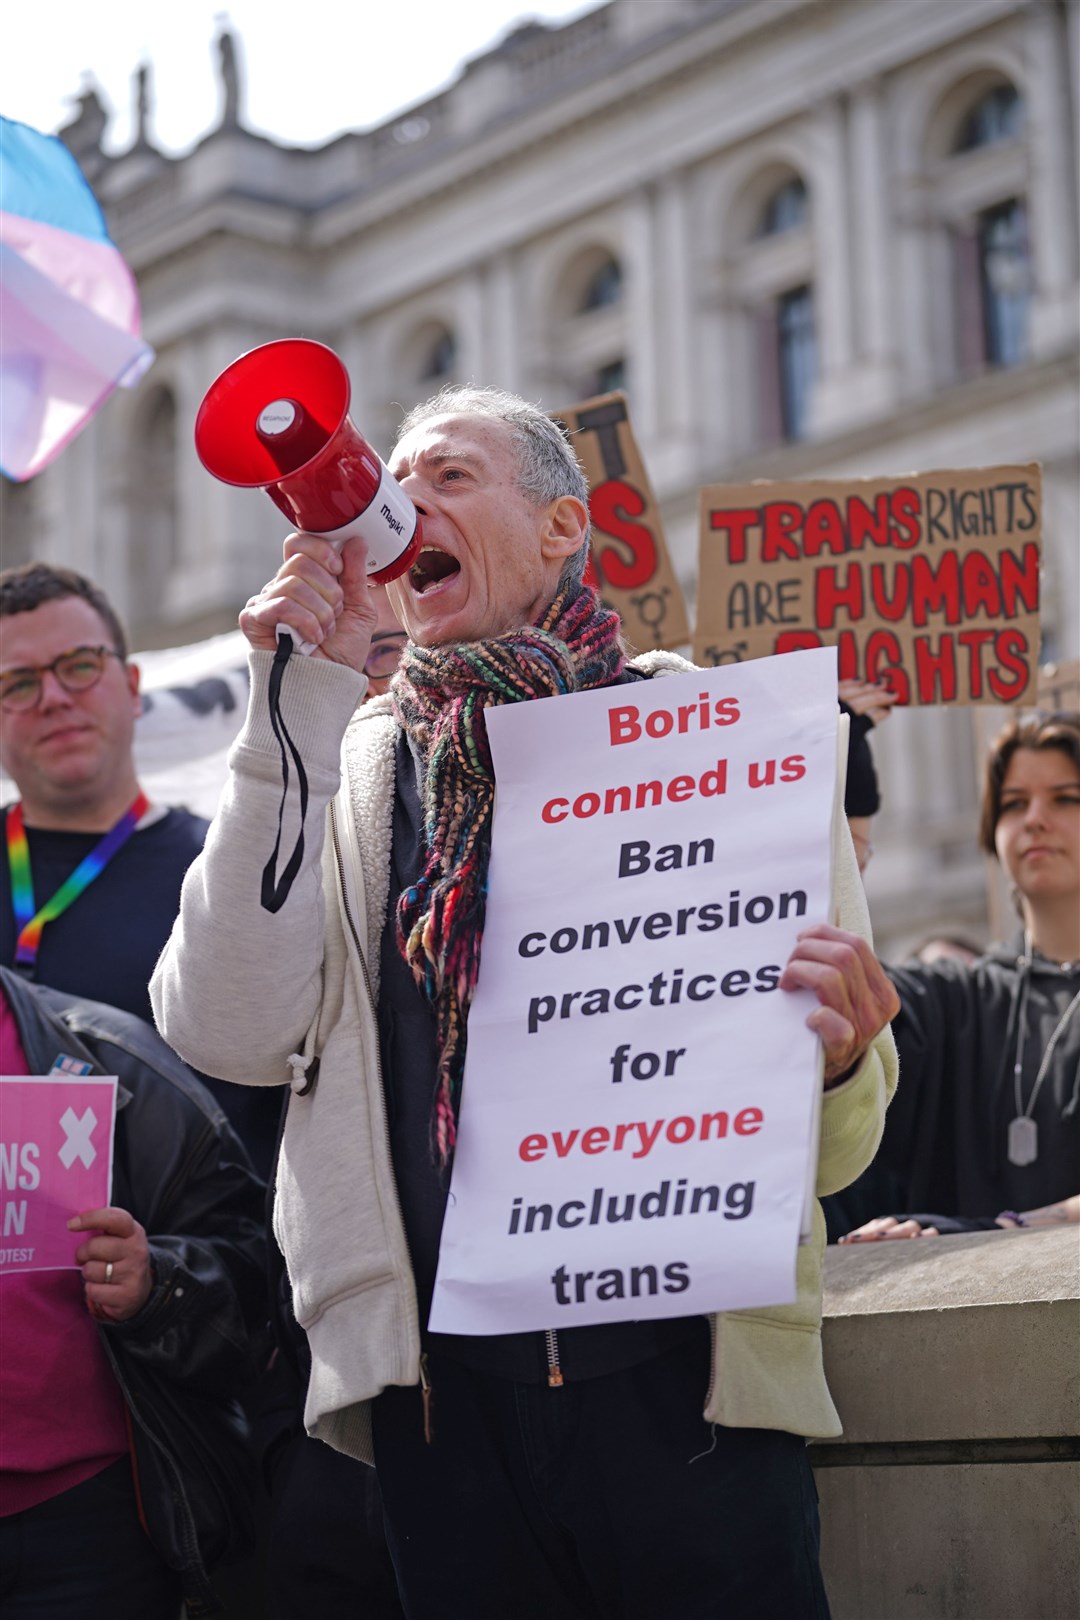 Peter Tatchell speaks during a protest outside Downing Street earlier this year (Yui Mok/PA)